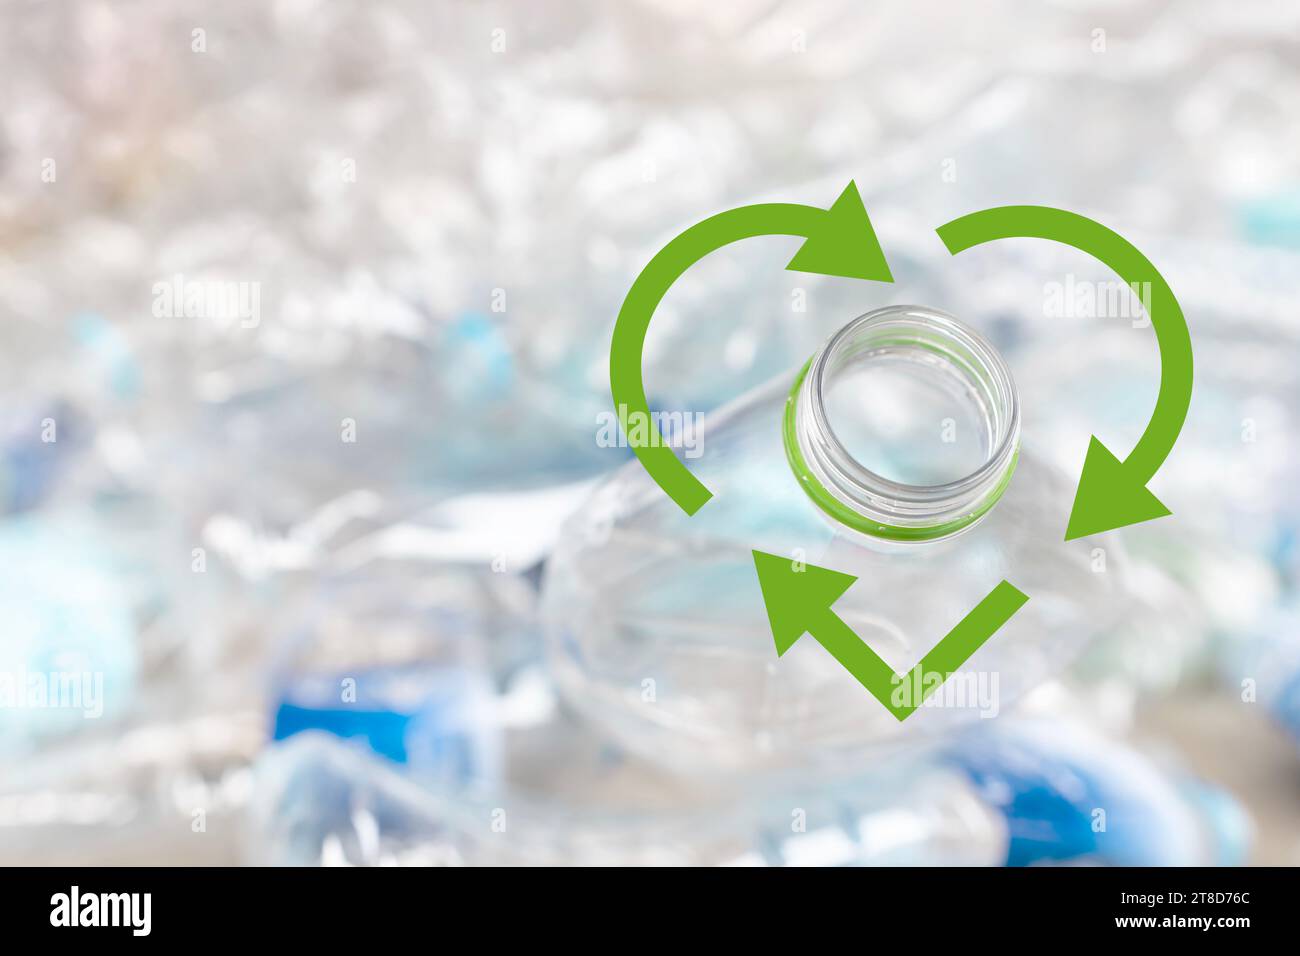 Heart-shaped recycling symbol on Waste water bottles for recycling. Stock Photo